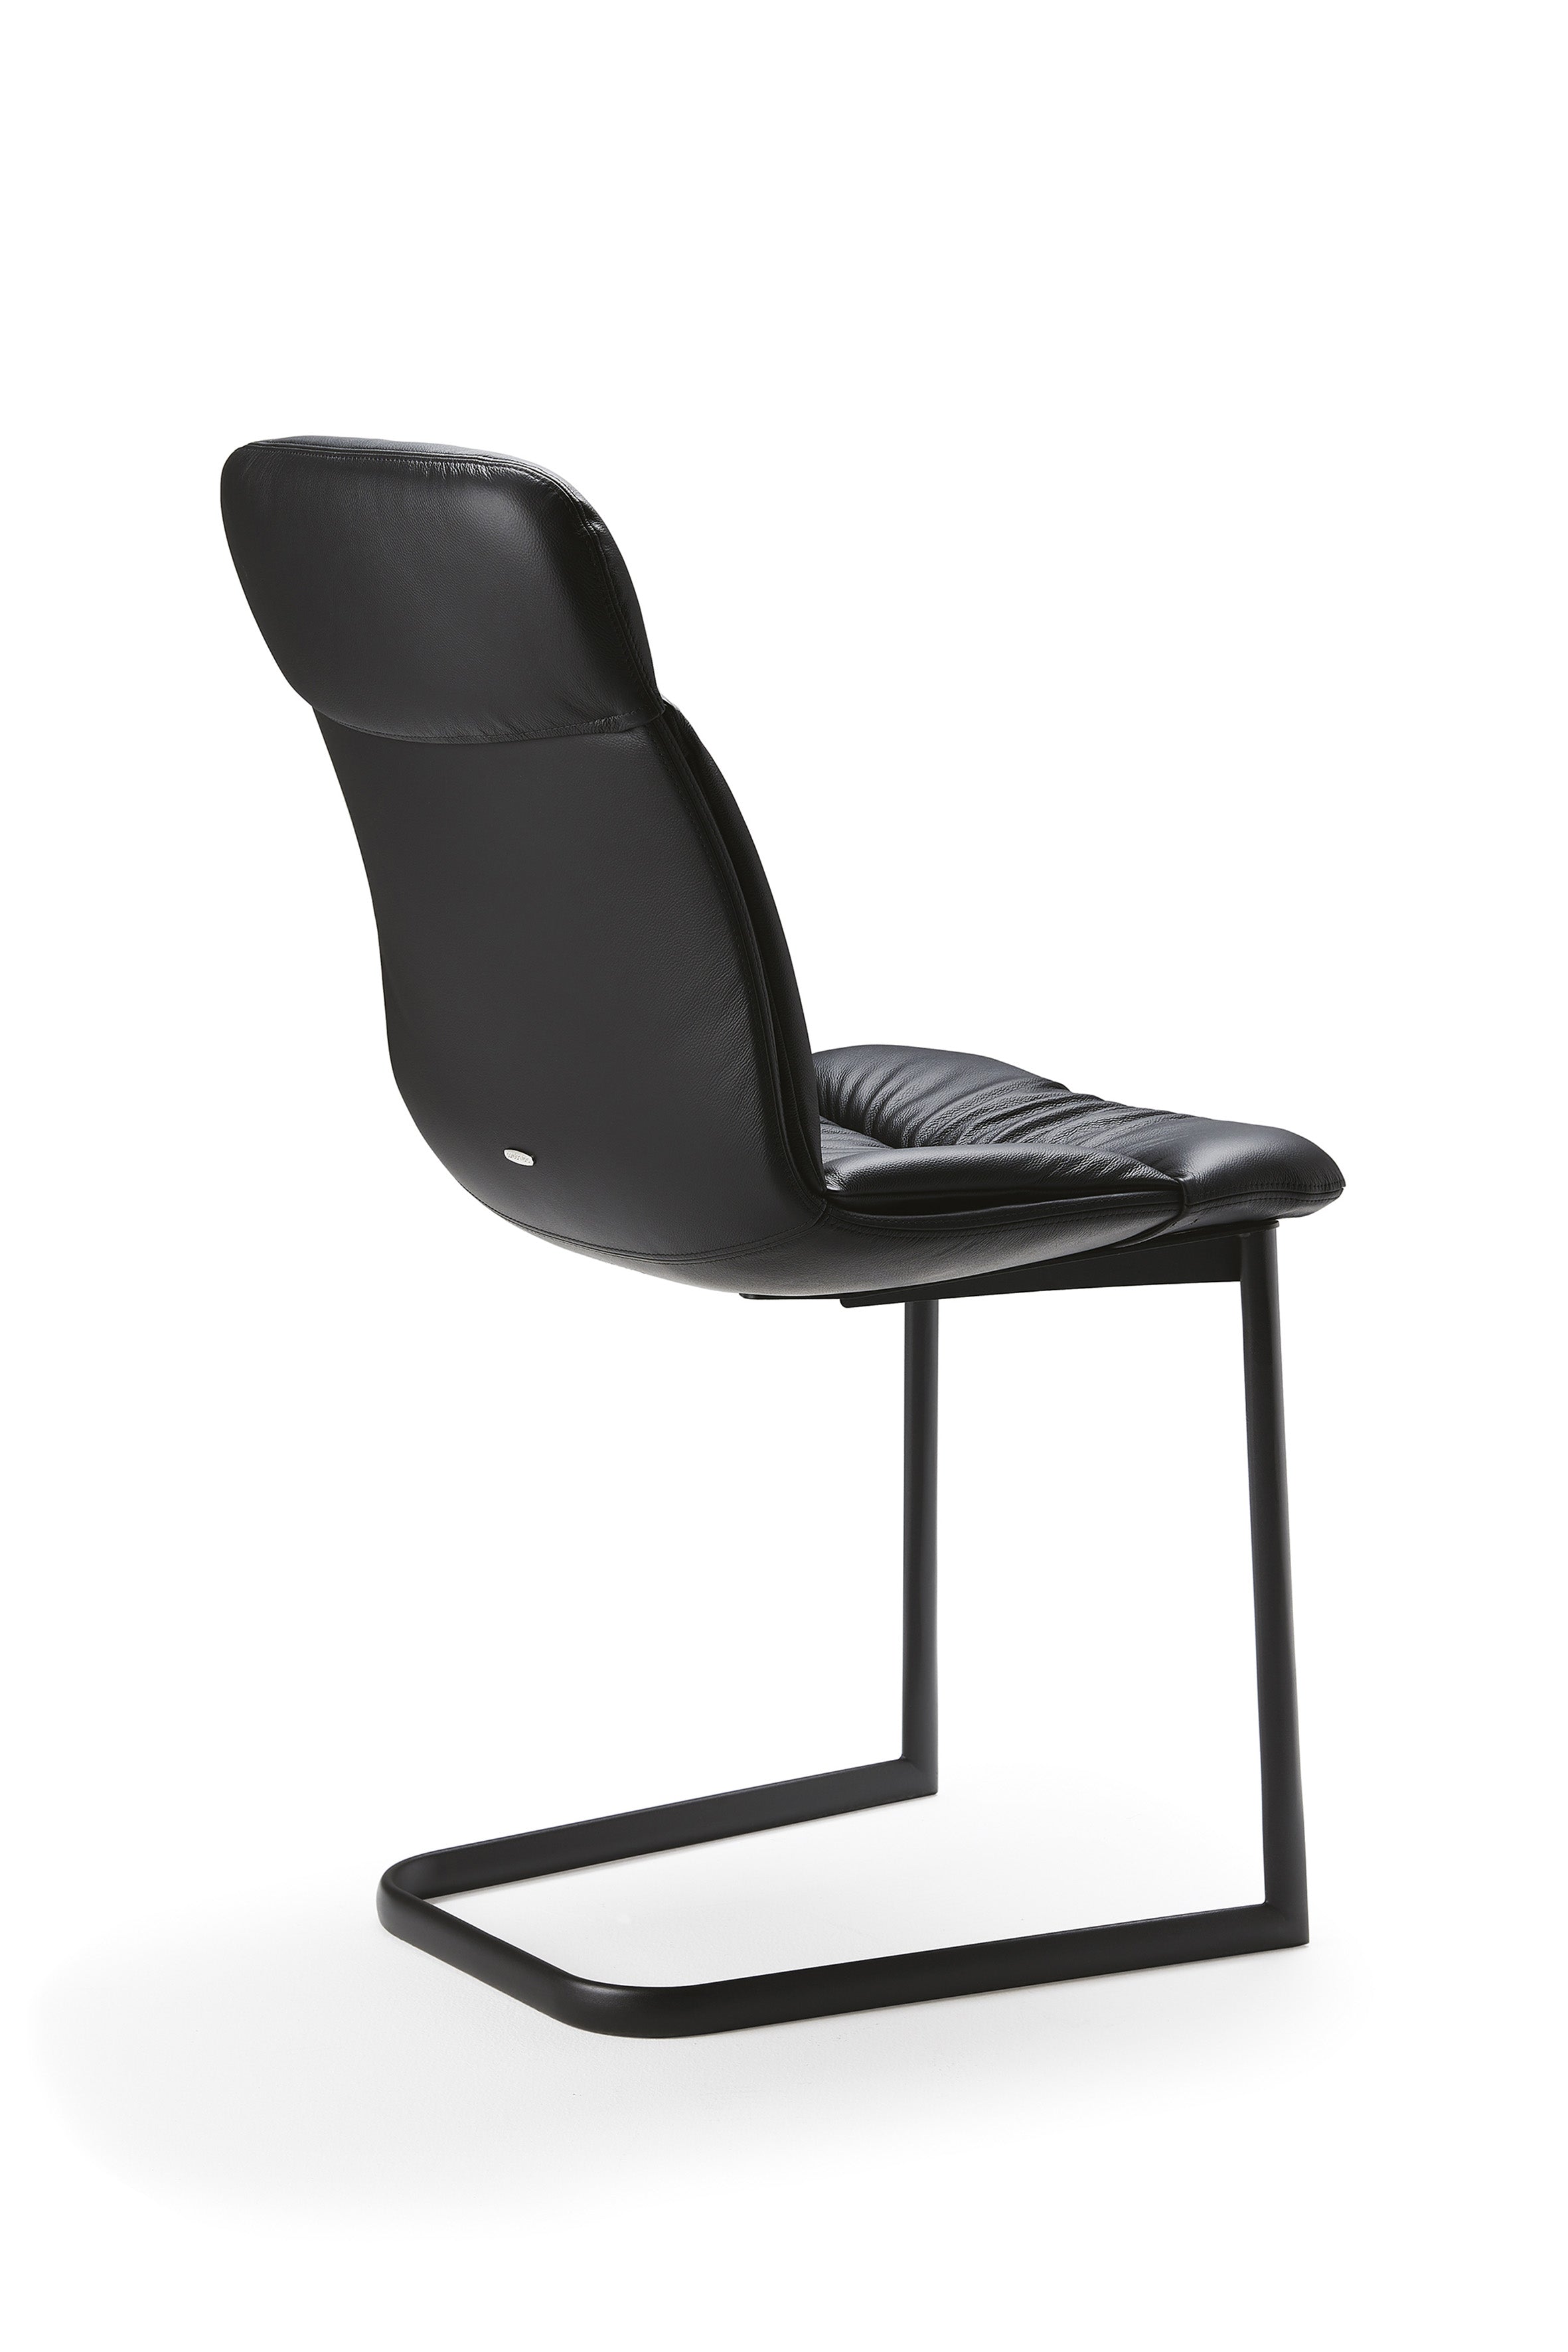 Cattelan Italia Kelly Cantilever Chair With Cantilever Frame